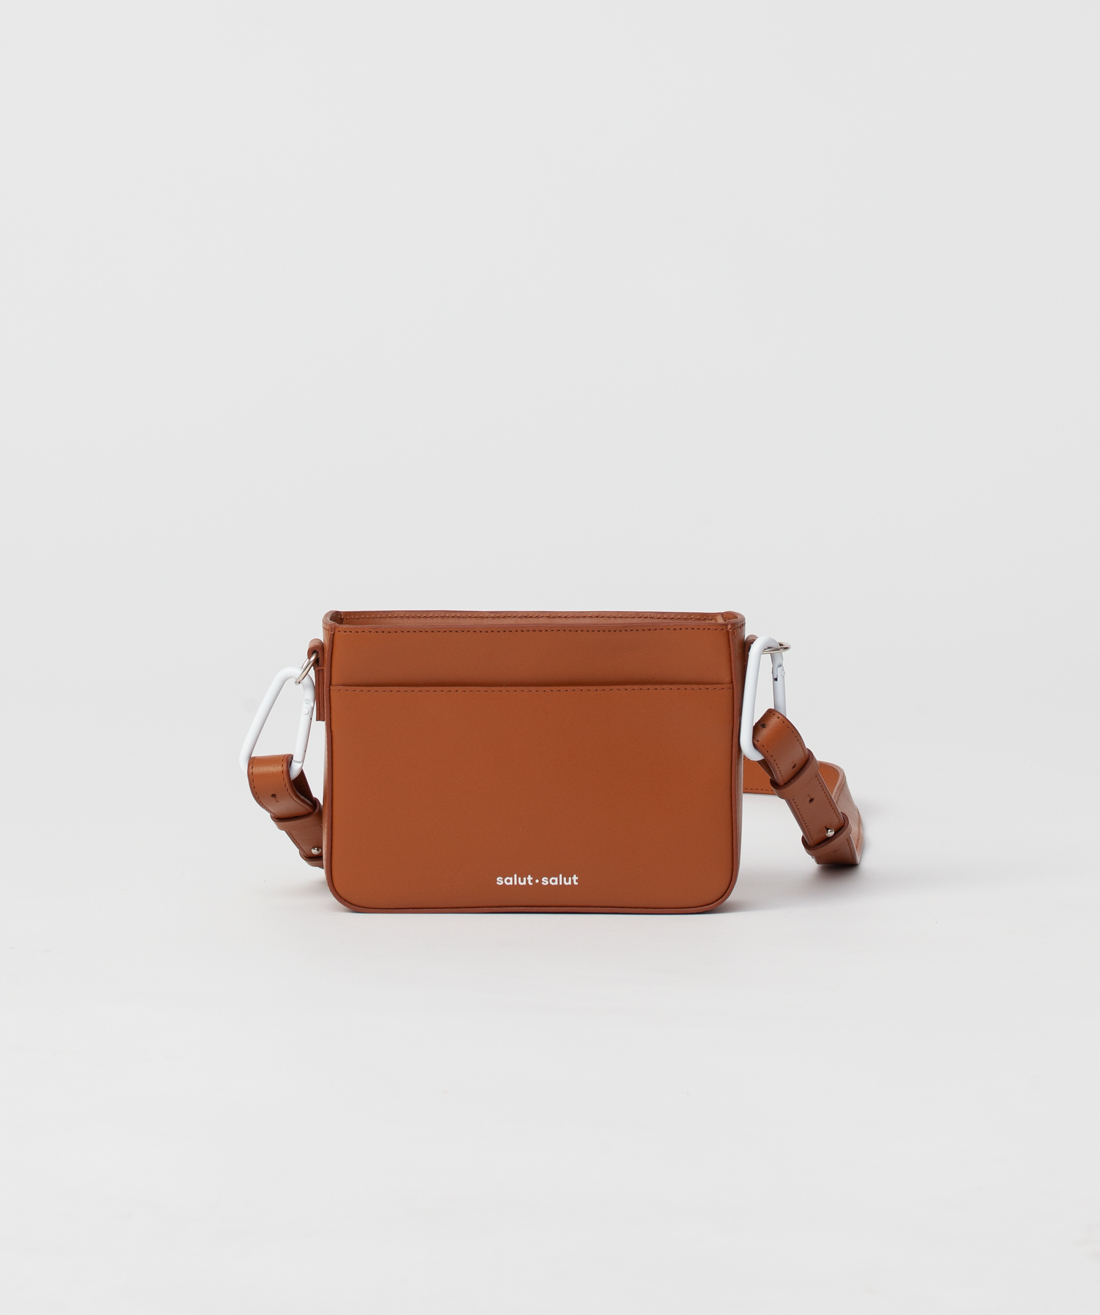 Belly - CAMEL LEATHER